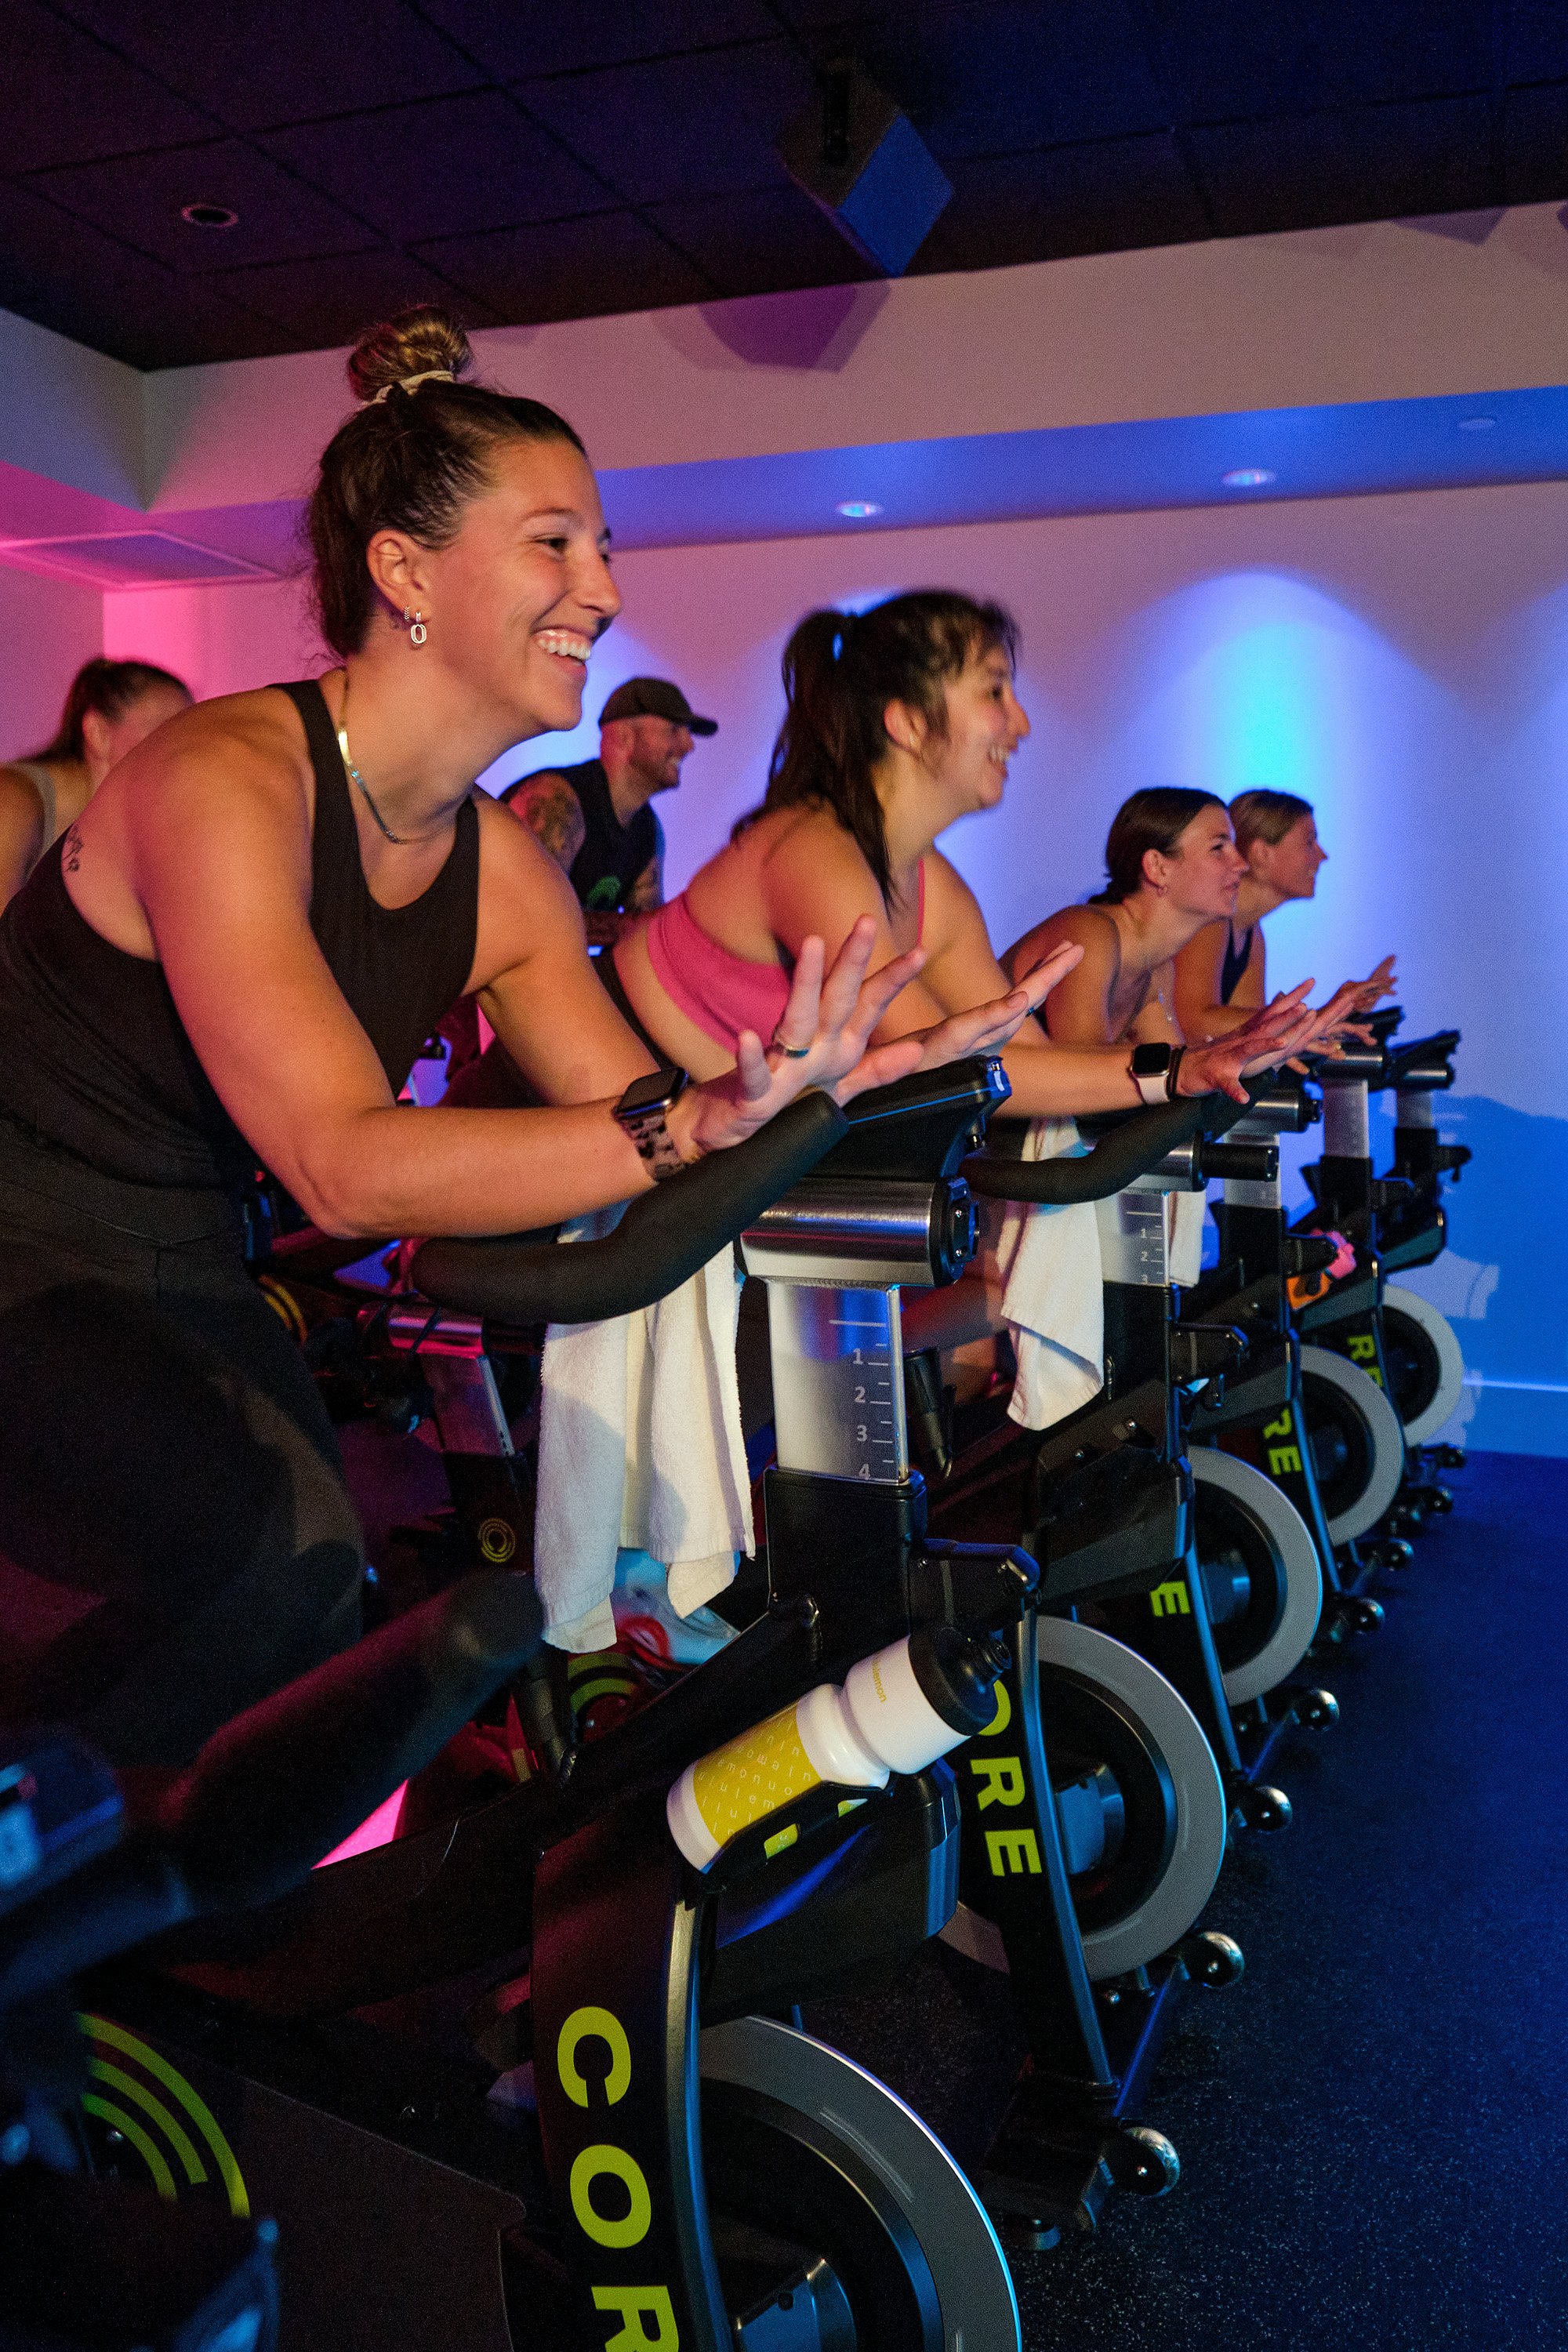 Indoor cycling theater featuring 30 custom-branded bikes, sensory illumination and a premium sound system.